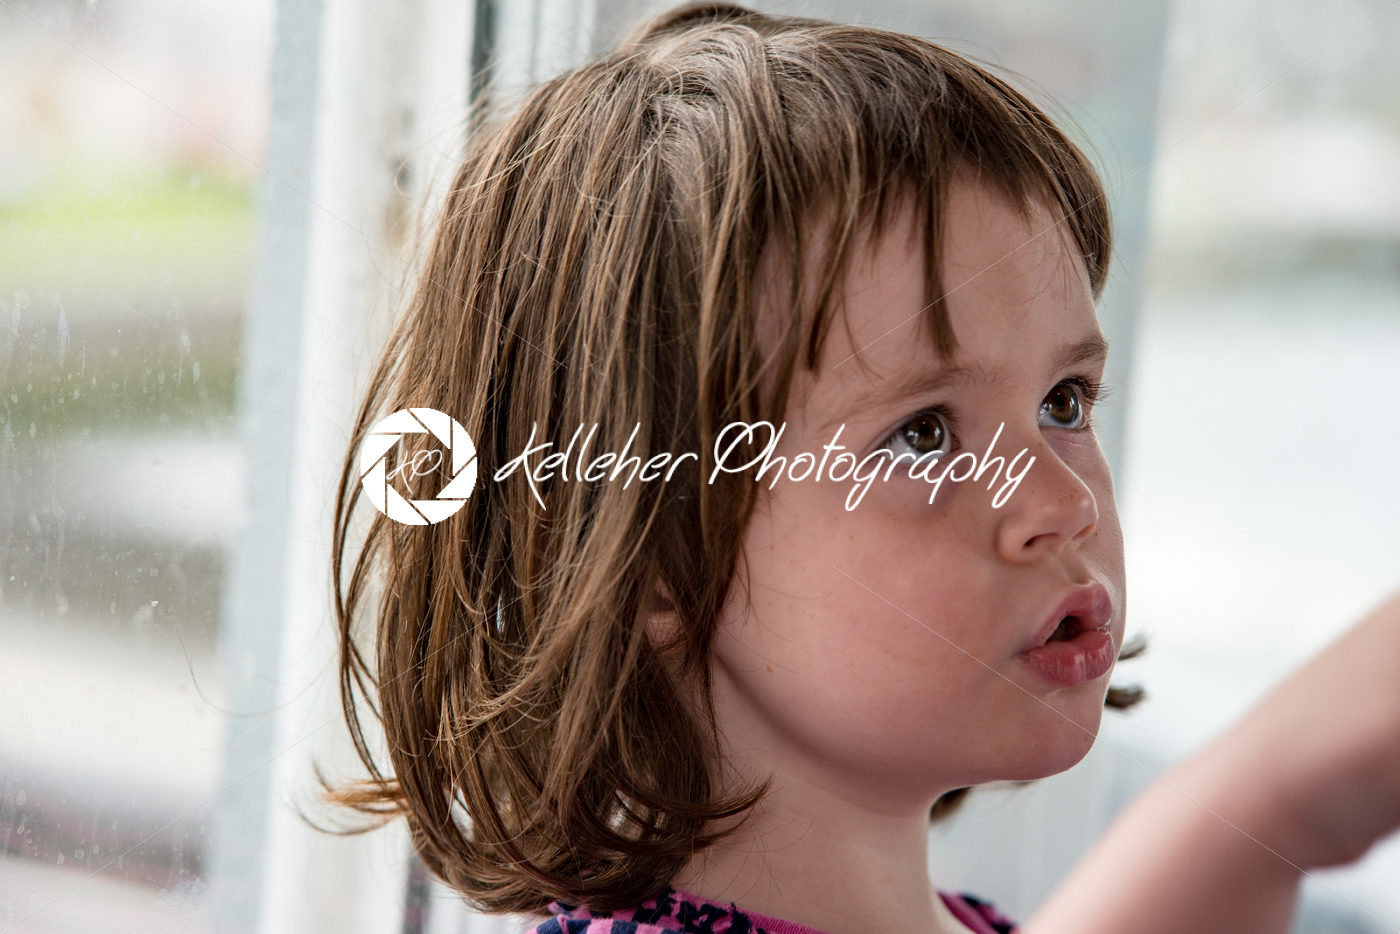 Young little girl portrait looking out window - Kelleher Photography Store